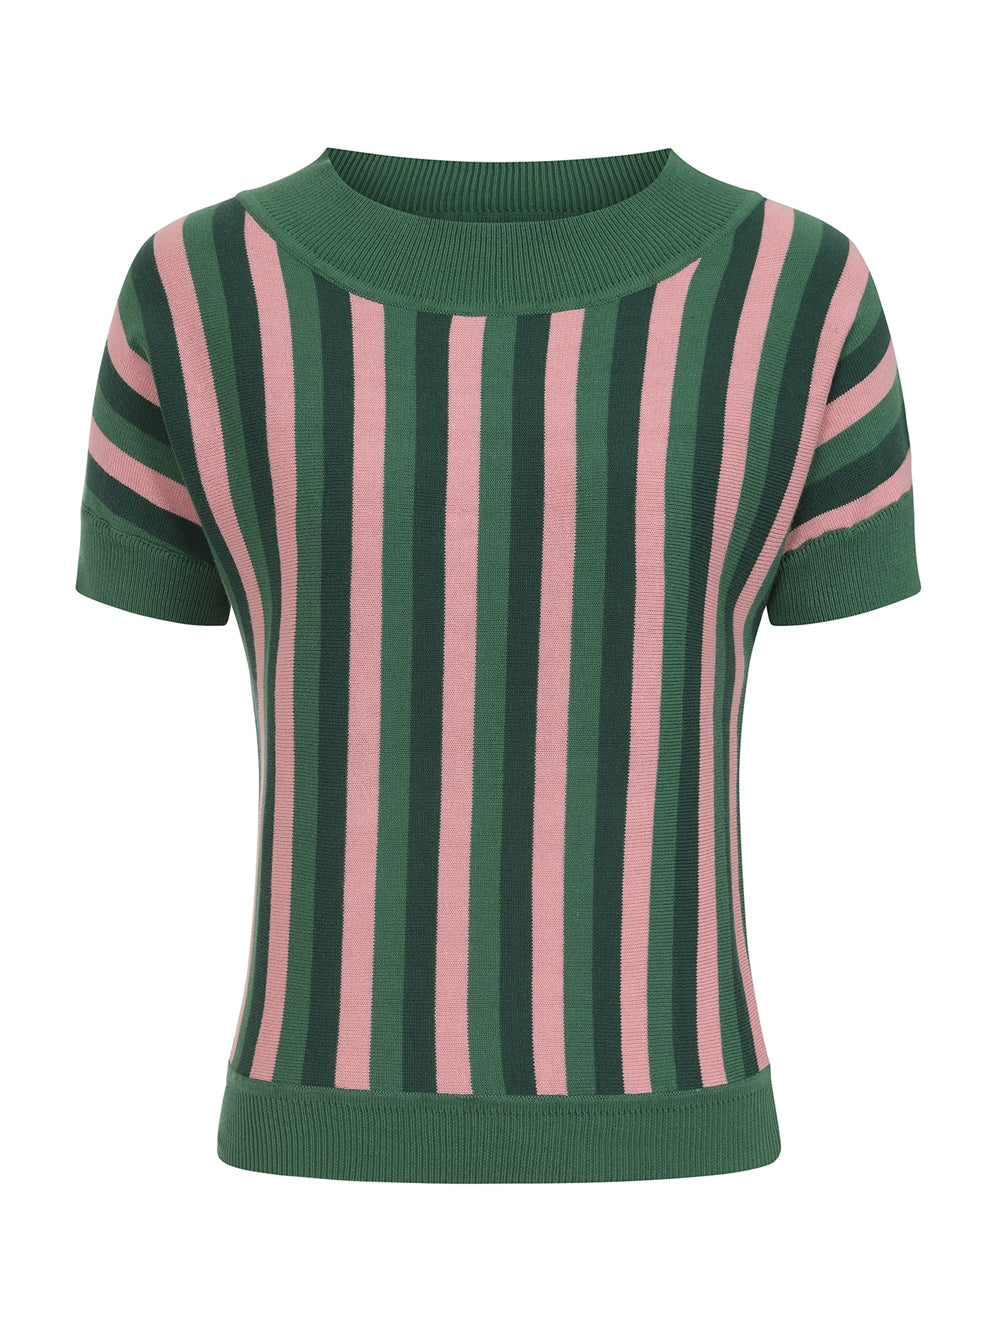 Collectif Joy Striped Knitted Sweater 40s retro vintage knit top jumper in green and pink stripes retro vintage pinup blouse Canadian Pin-Up Shop Suzie's Bombshell Boutique